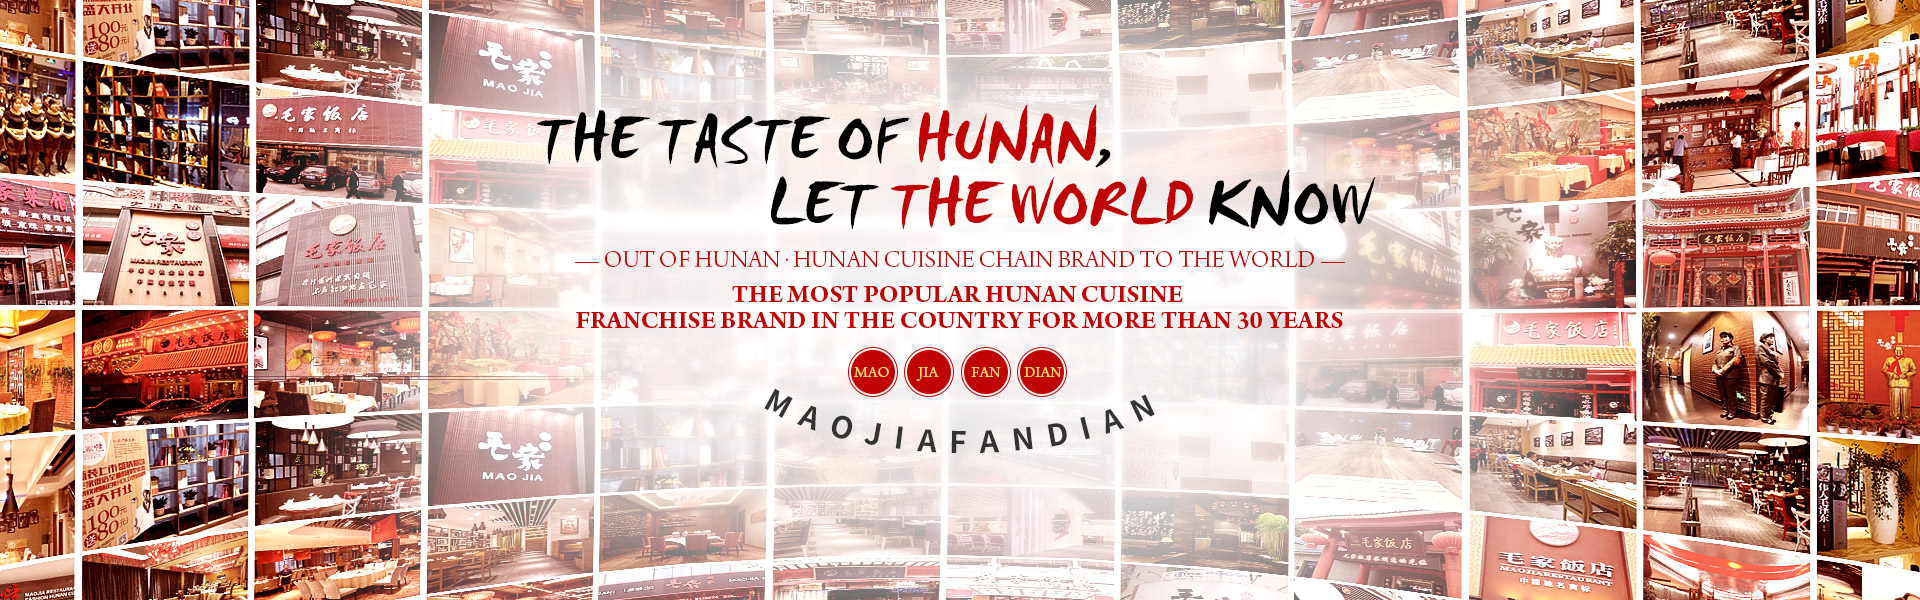 Let the whole world know the taste of Hunan dishes